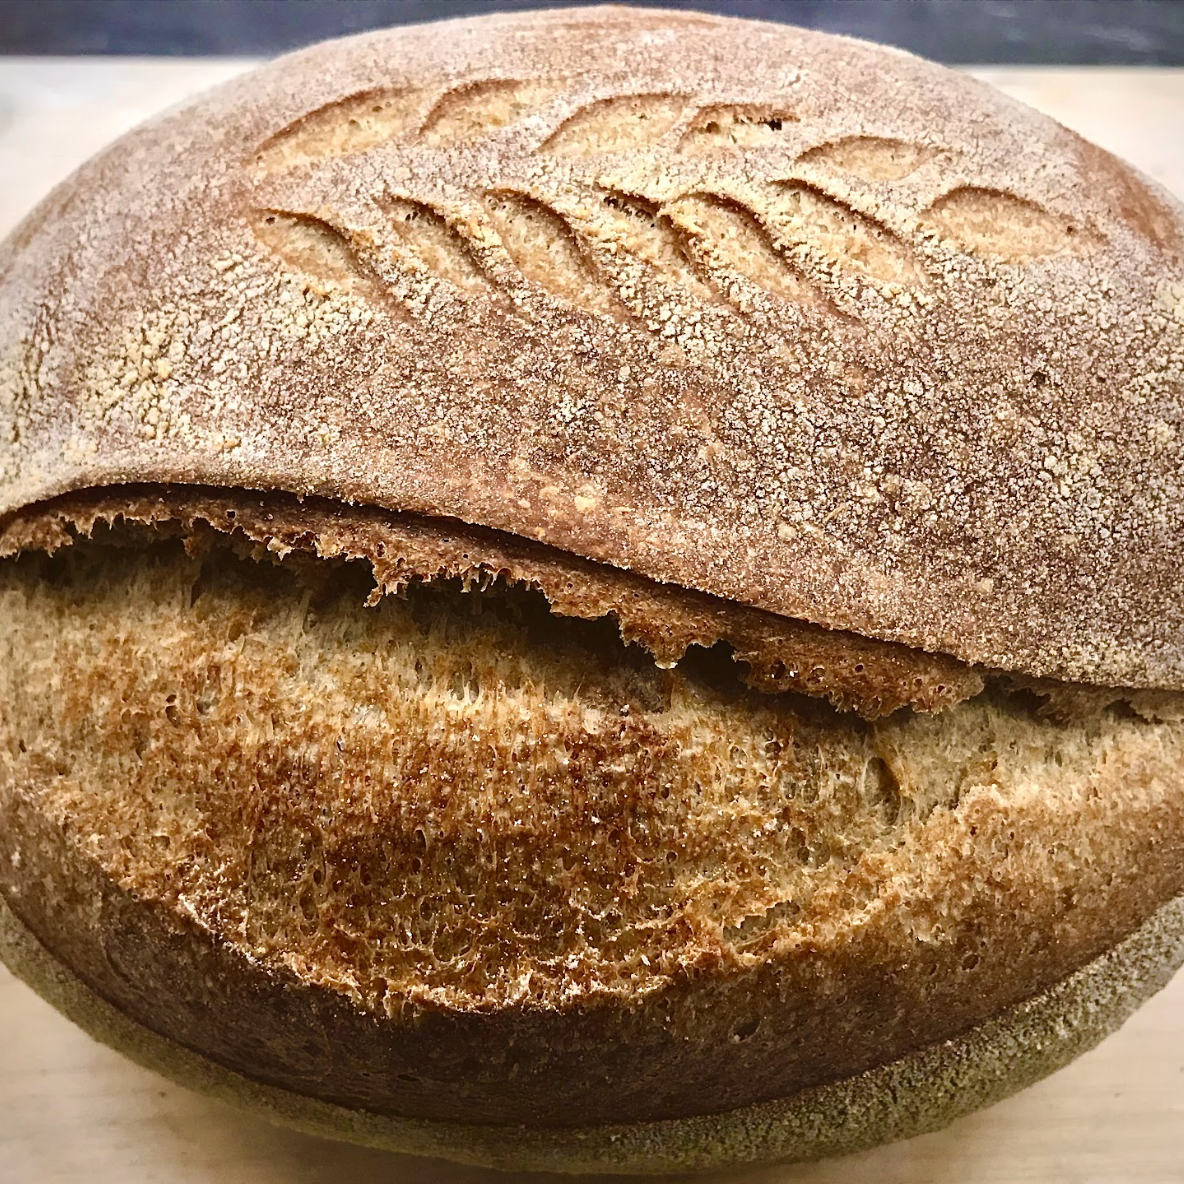 <h4>Bread</h4>
Every day Breads are Whole Wheat Loaf, Anadama Loaf, Multigrain Loaf, Country Sourdough Boule, Pain de Mie Loaf & Baguettes. 
Bread special is Caraway Rye, Parker House Rolls, Semolina